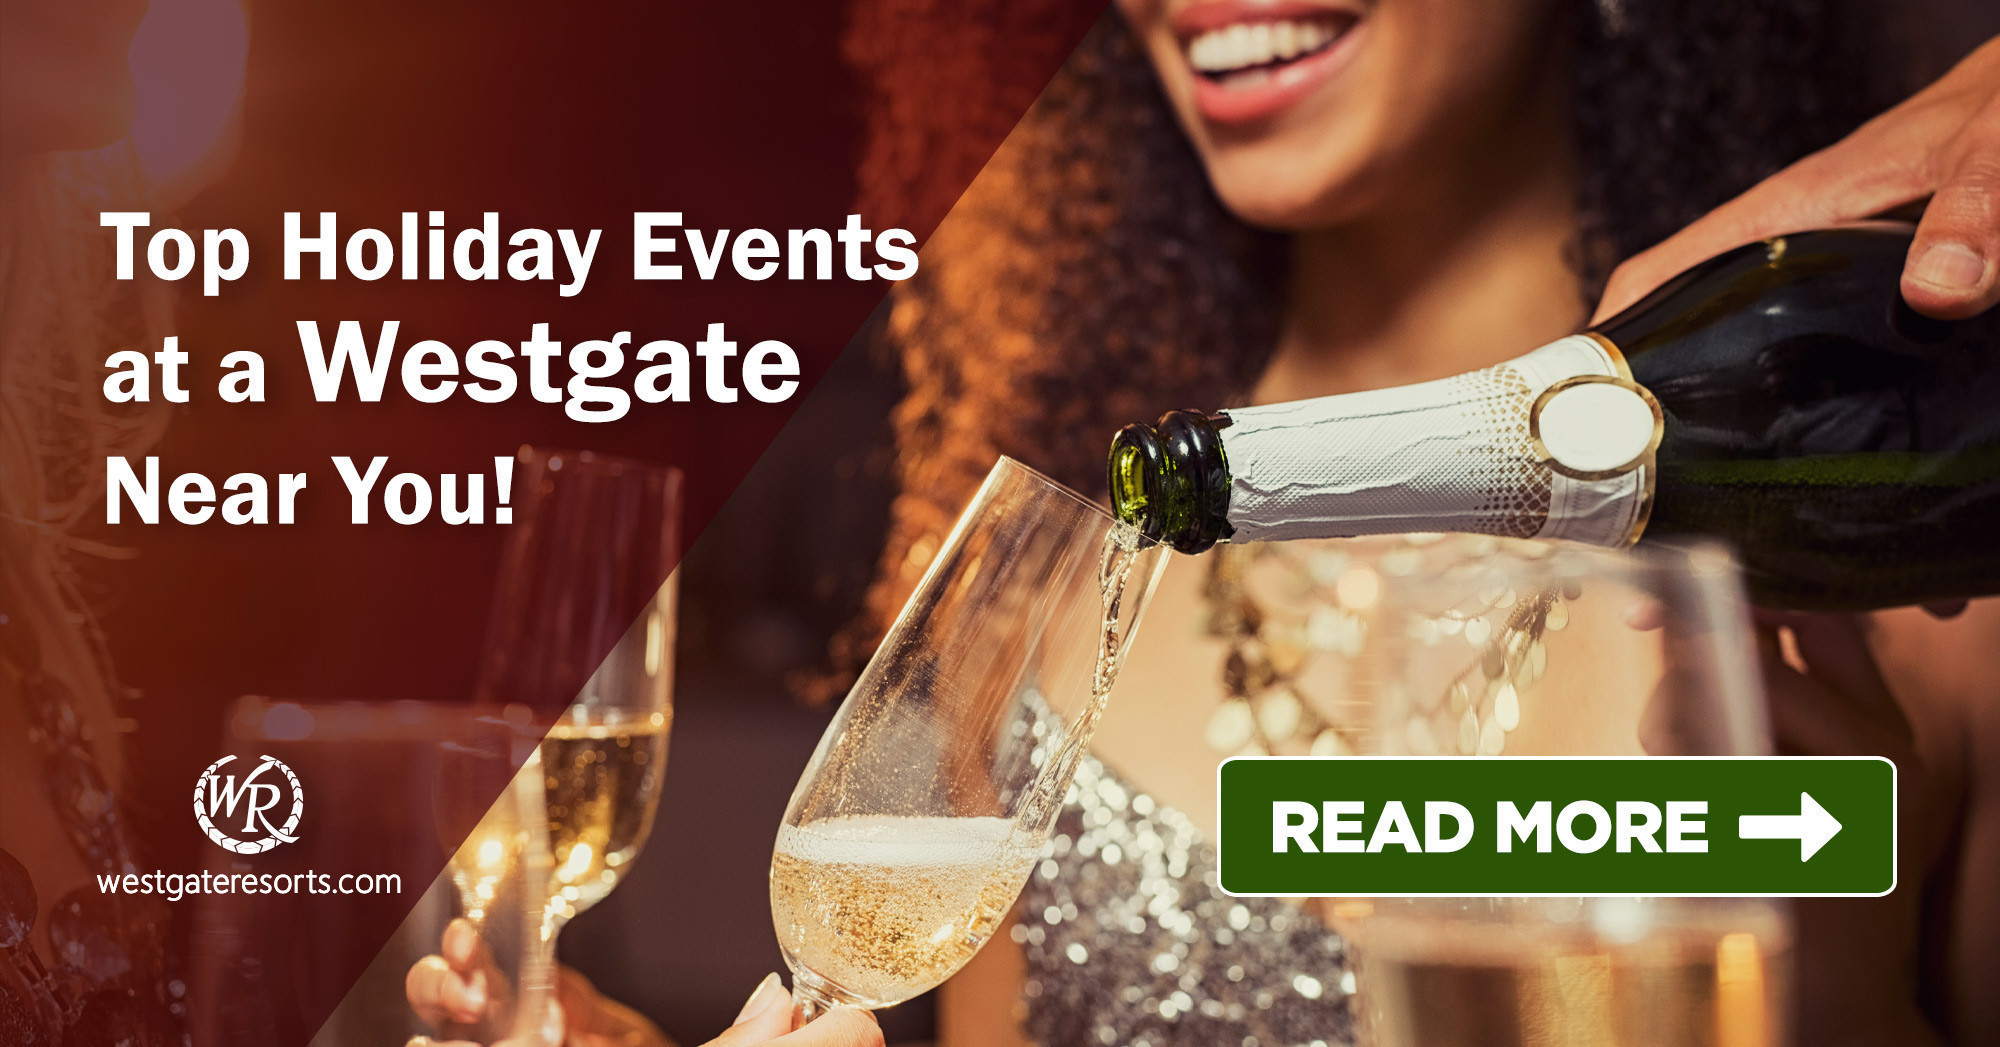 Top Holiday Events at a Westgate Near You!